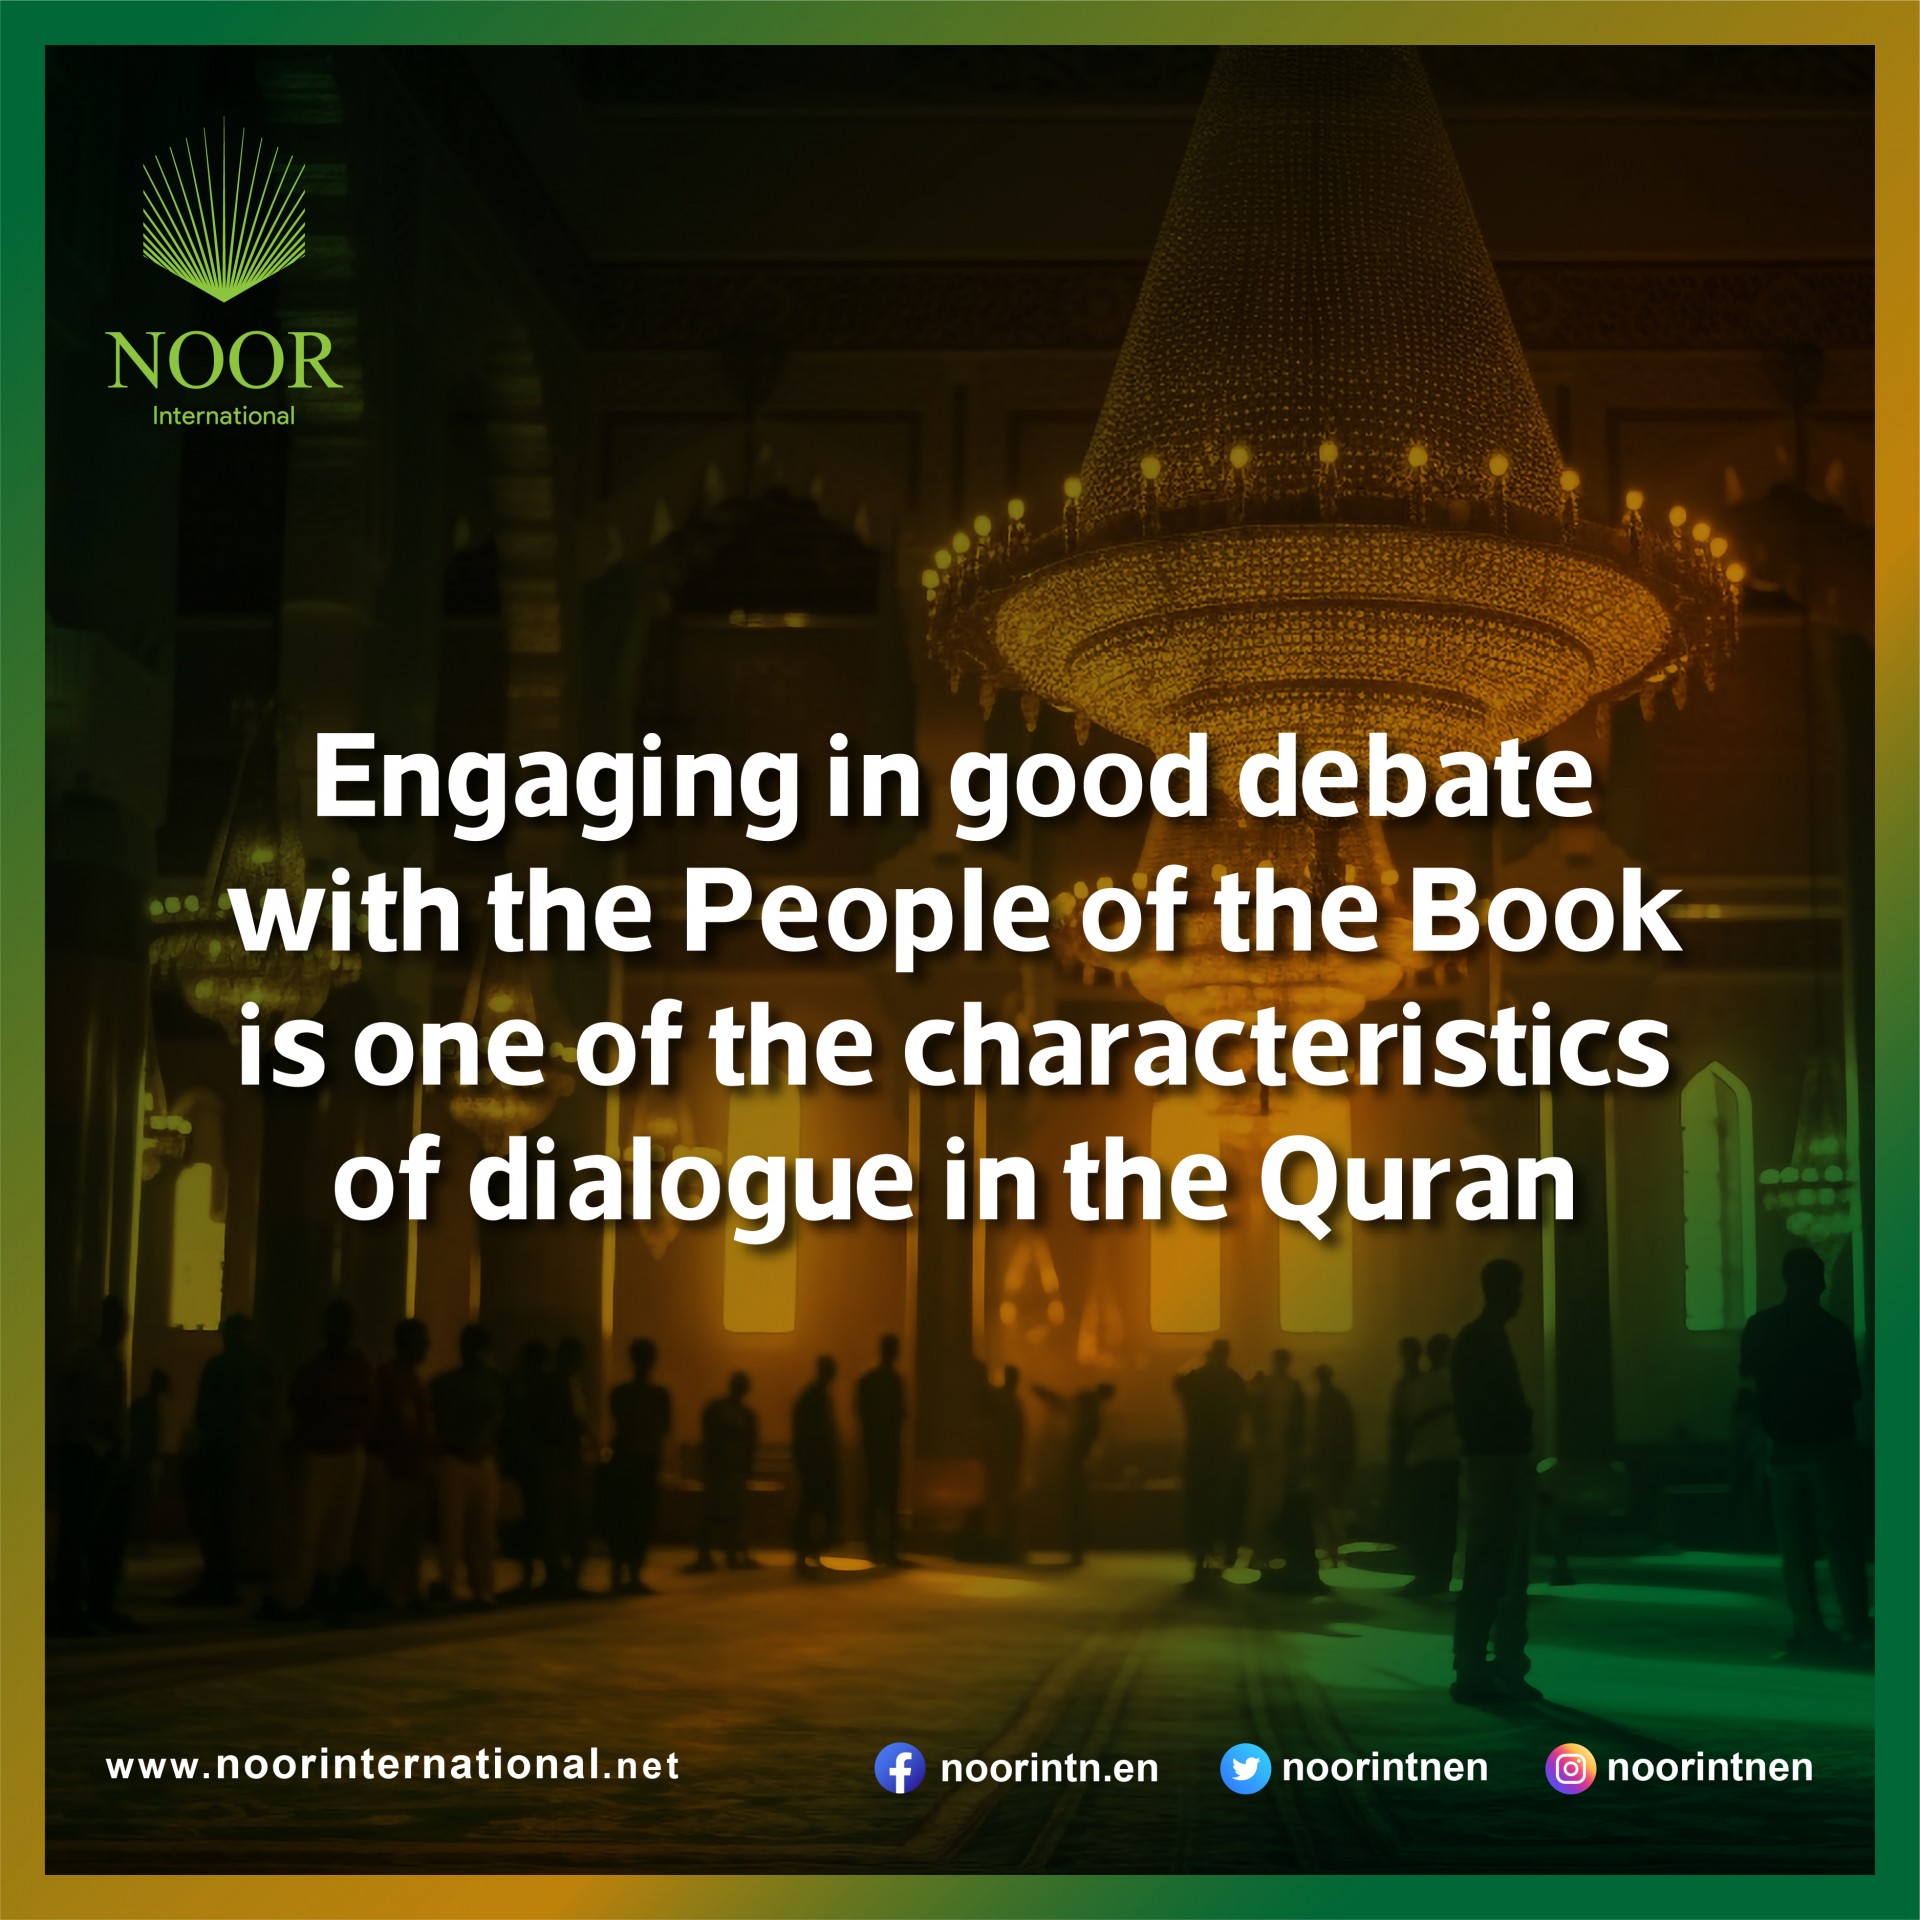 The culture of dialogue in the Quran